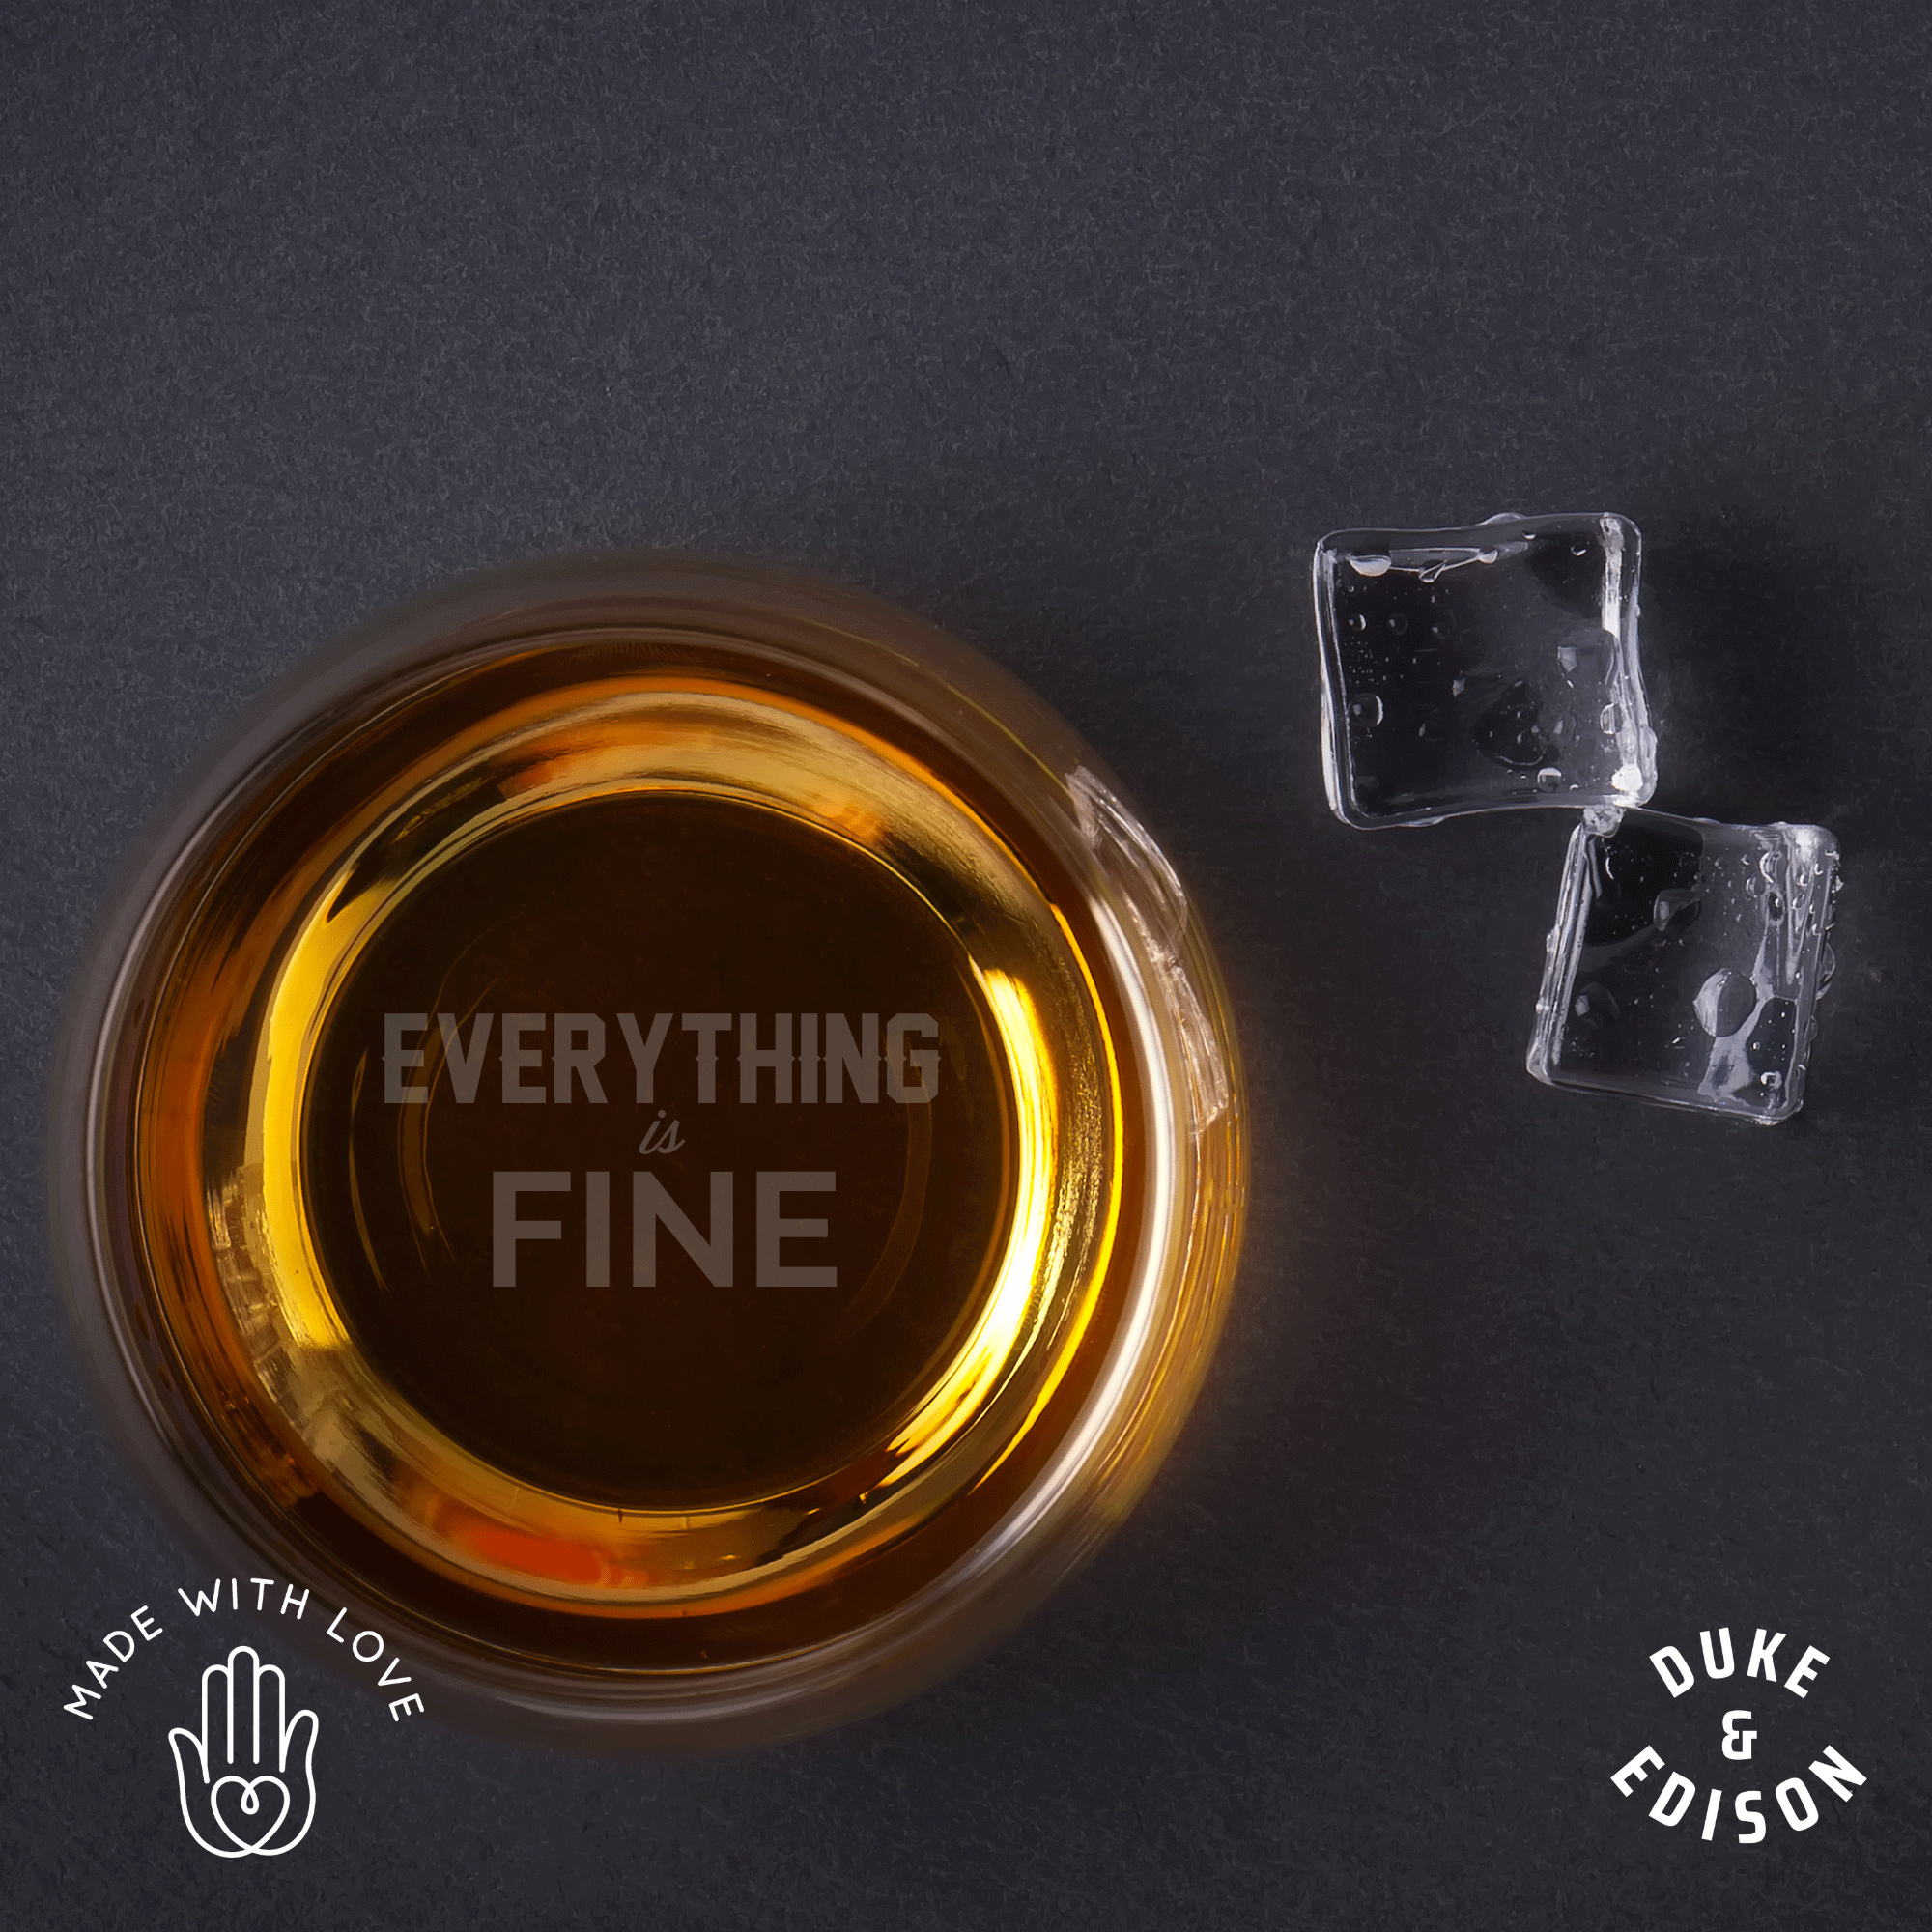 Everything is Fine - Rocks Glass